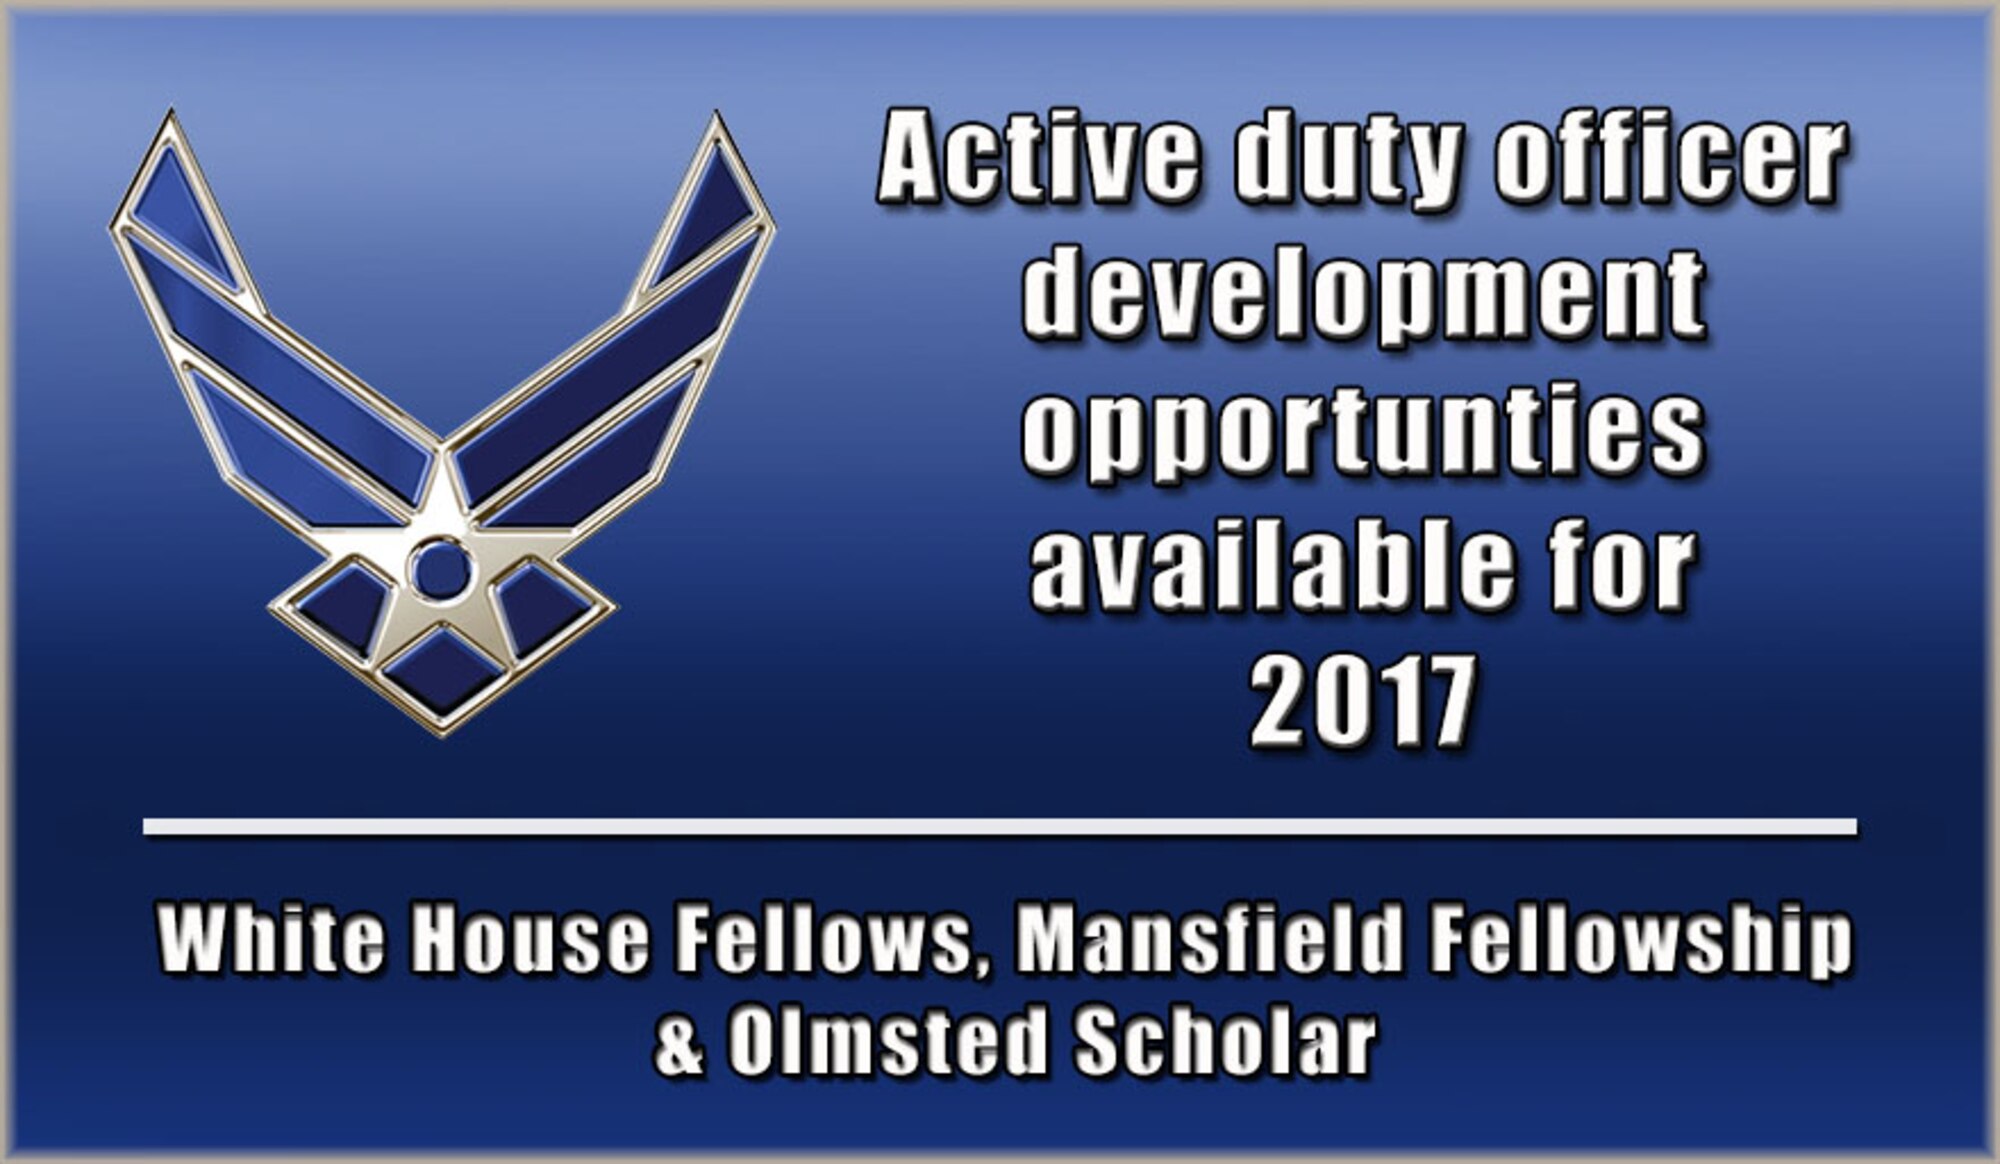 The Air Force has several development opportunities available in 2017 for active duty officers via the White House Fellows, Mansfield Fellowship and Olmsted Scholar programs. (AFPC courtesy graphic)